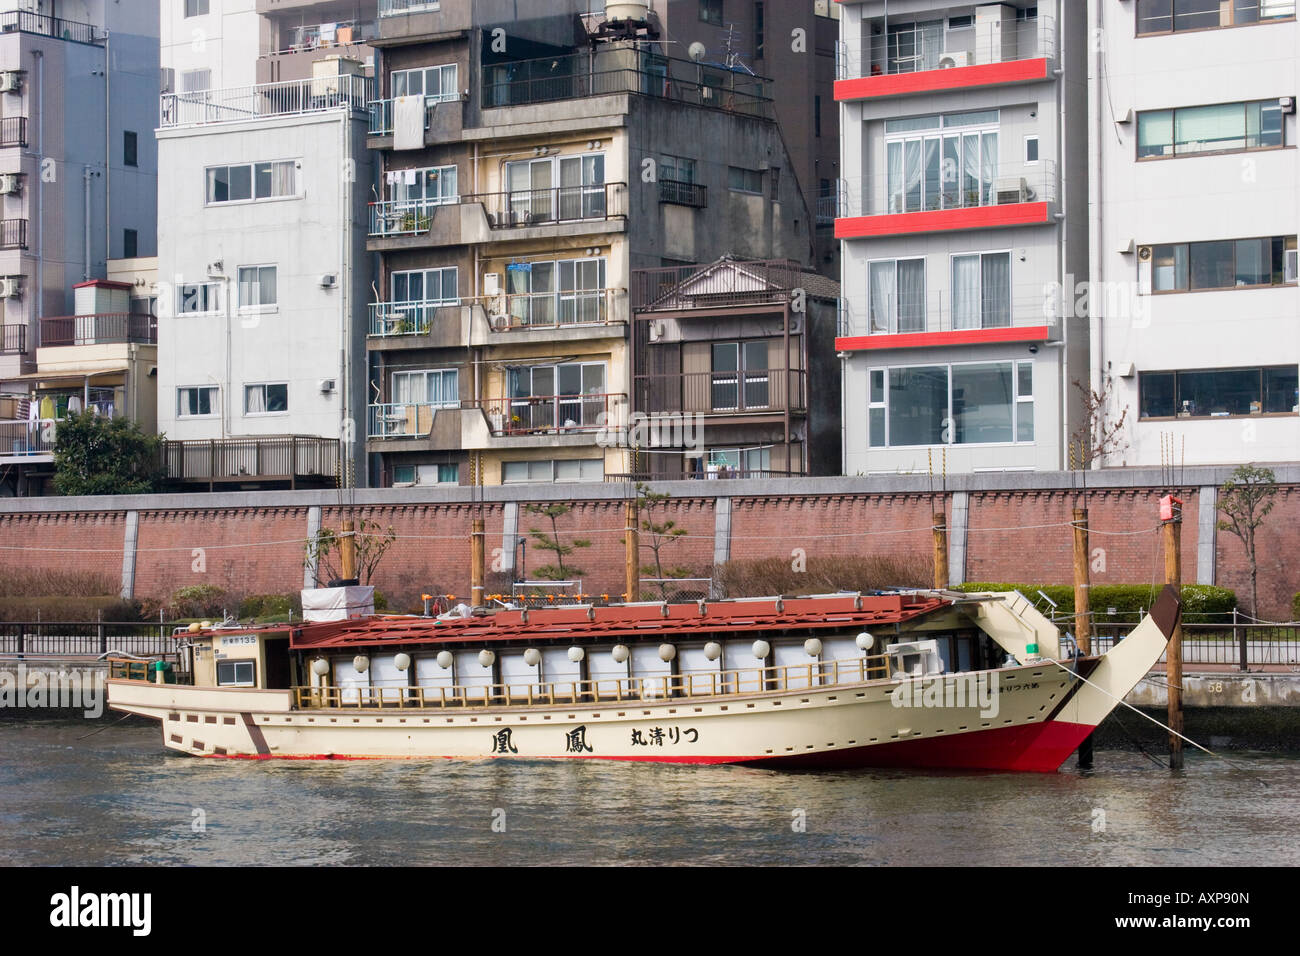 Restaurant boat docked on the Sumida River in Asakusa district of Tokyo Japan Stock Photo